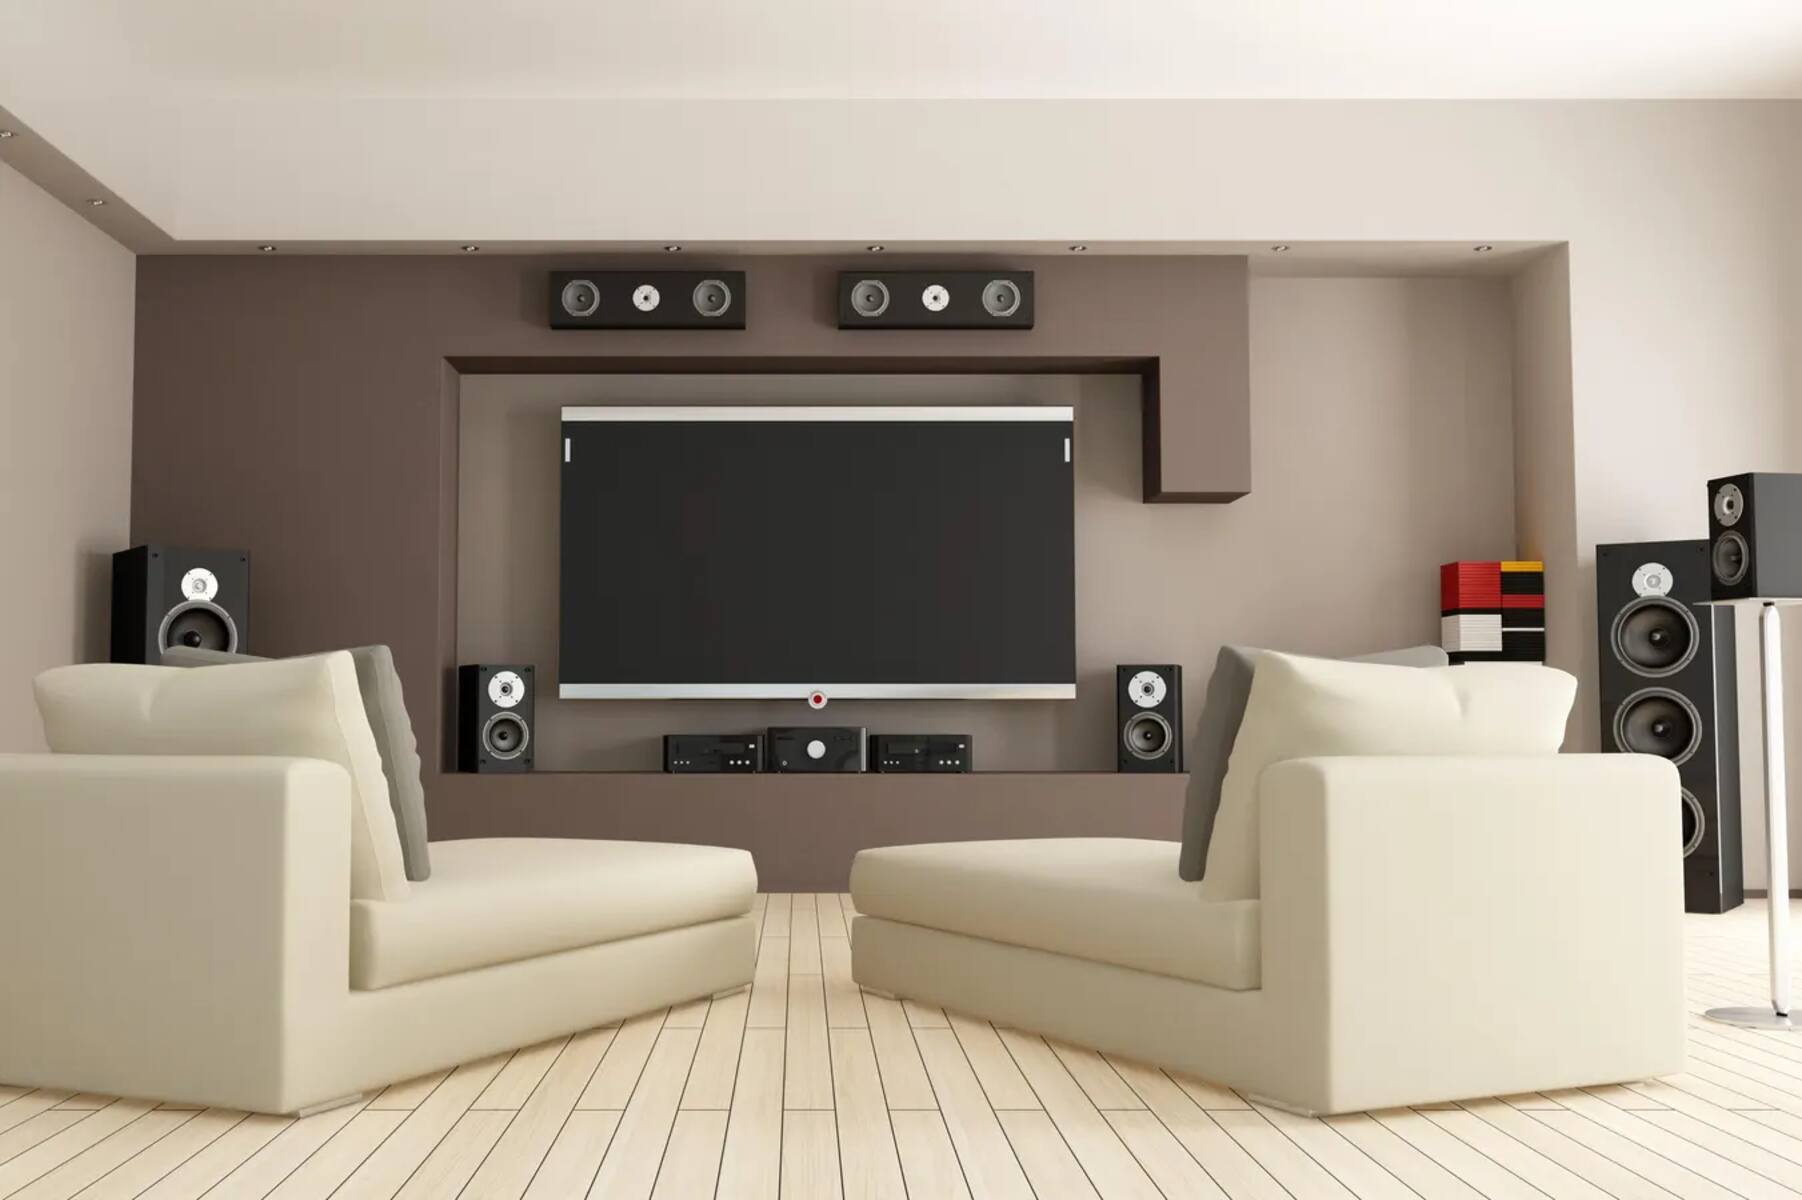 What The Best Latest Surround Sound System For Home